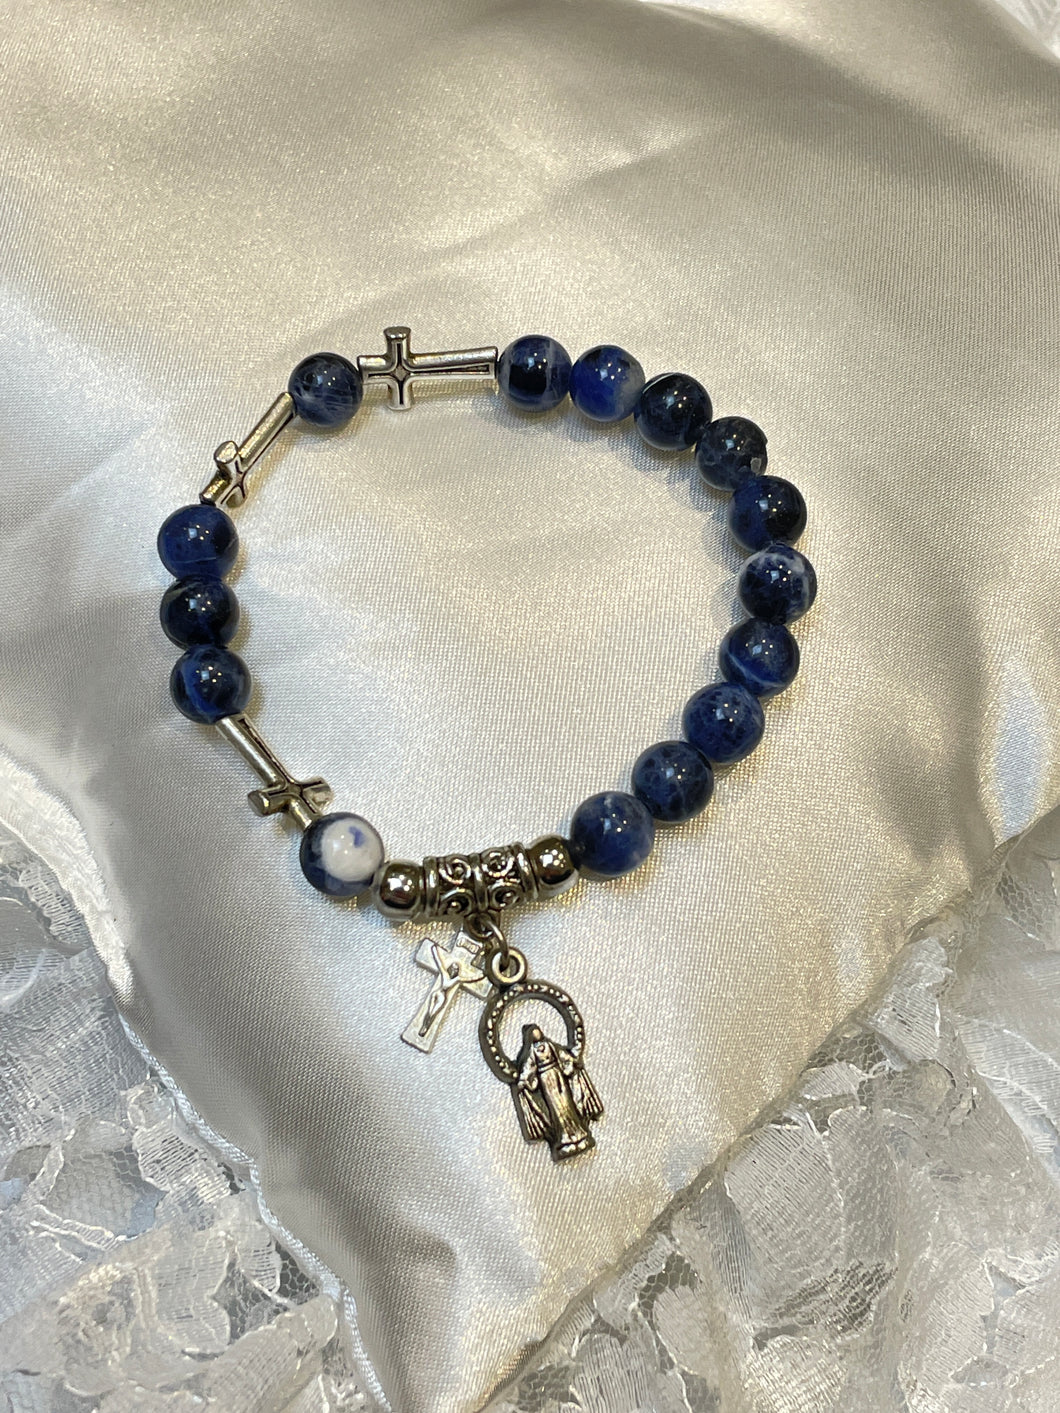 Dark Blue Gemstone Rosary Bracelet with Our Lady of Grace and Crucifix Charms